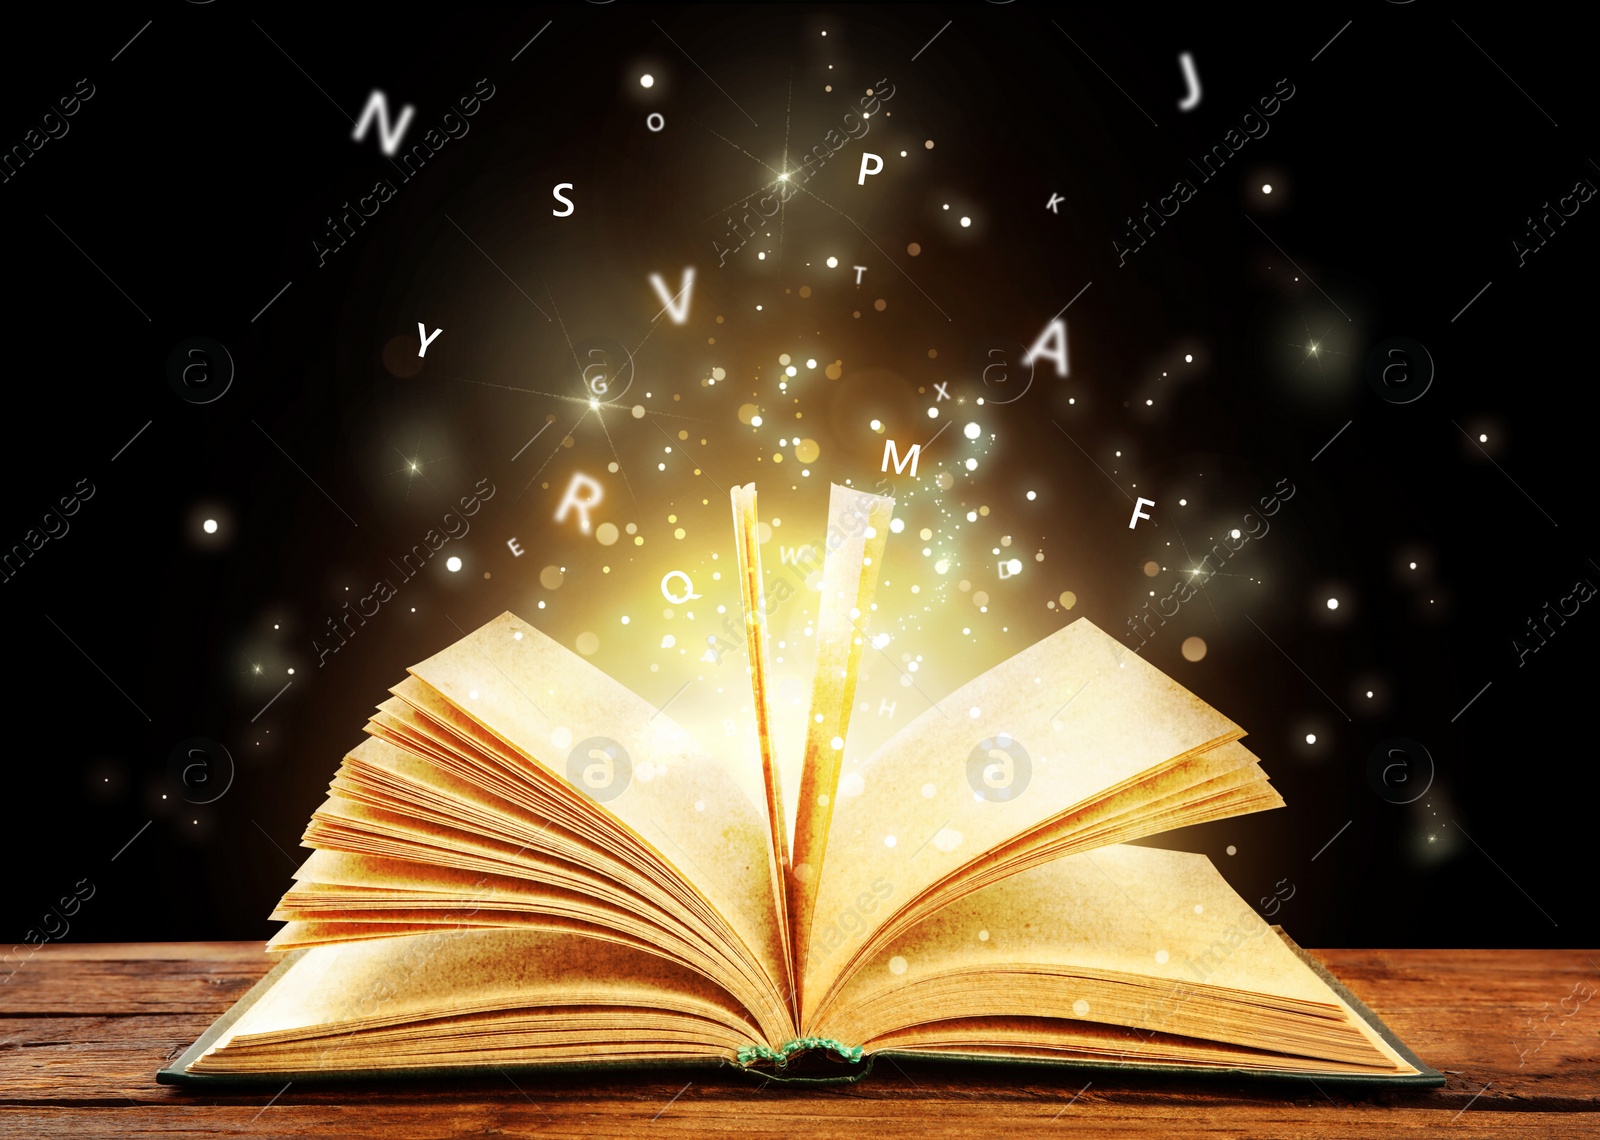 Image of Open book with magic light and glowing letters flying out of it on wooden table against black background